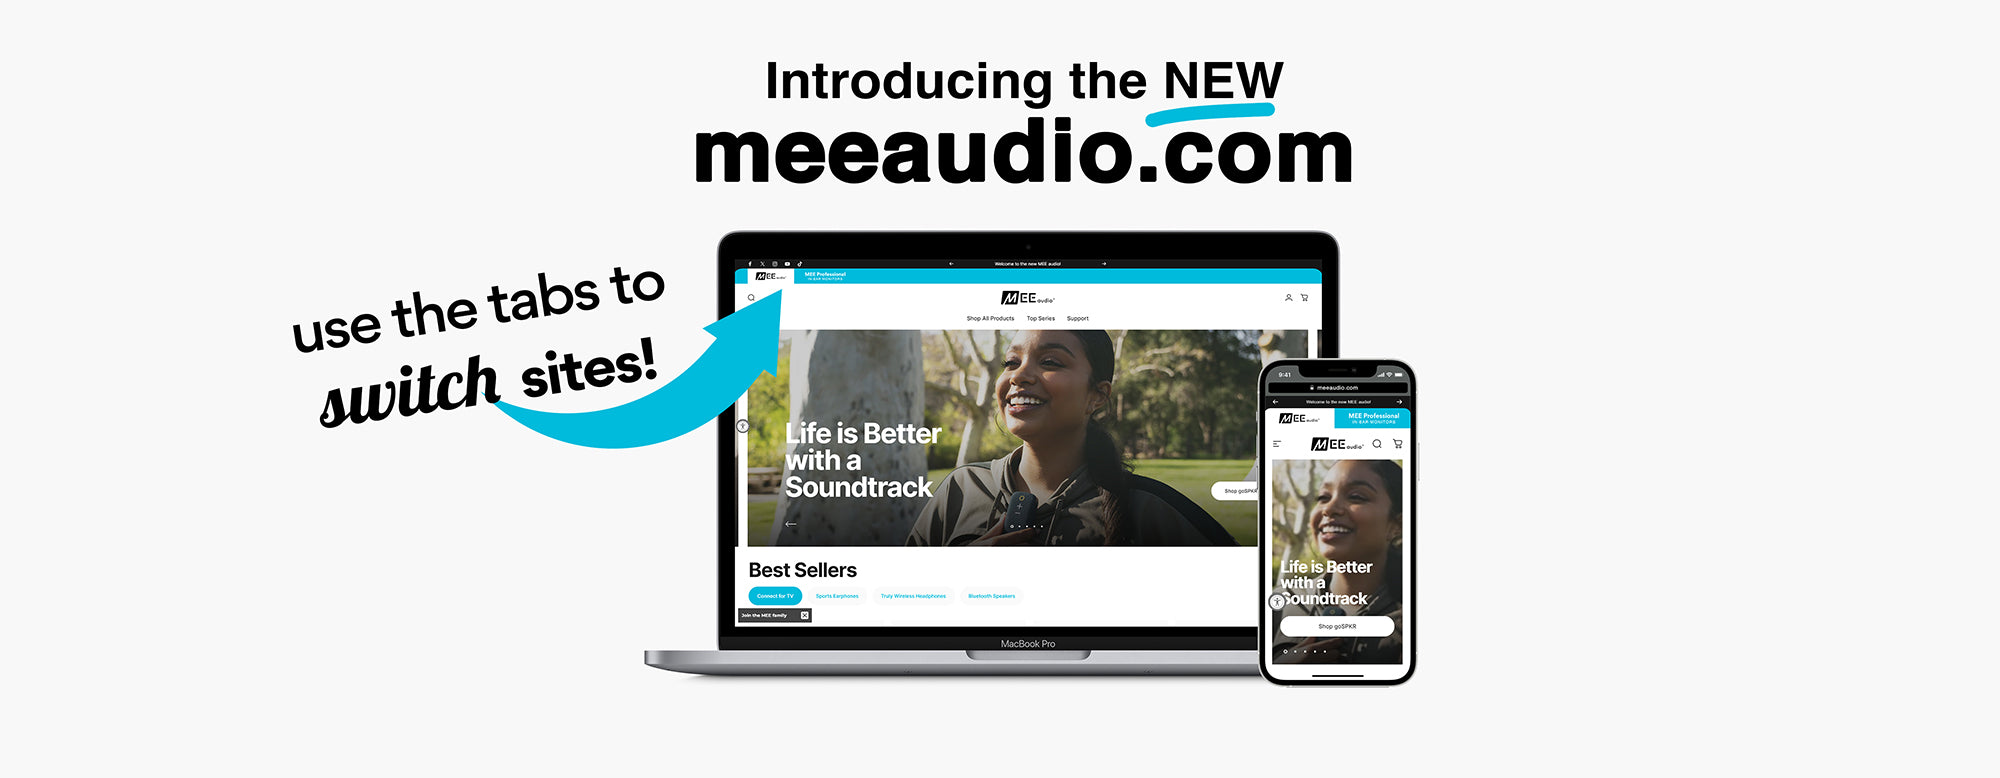 Promotional graphic for the new mee audio website, featuring a display of the website on a desktop monitor and a mobile device, with a headline "introducing the new meeaudio.com" and a text "use the tabs to switch sites.